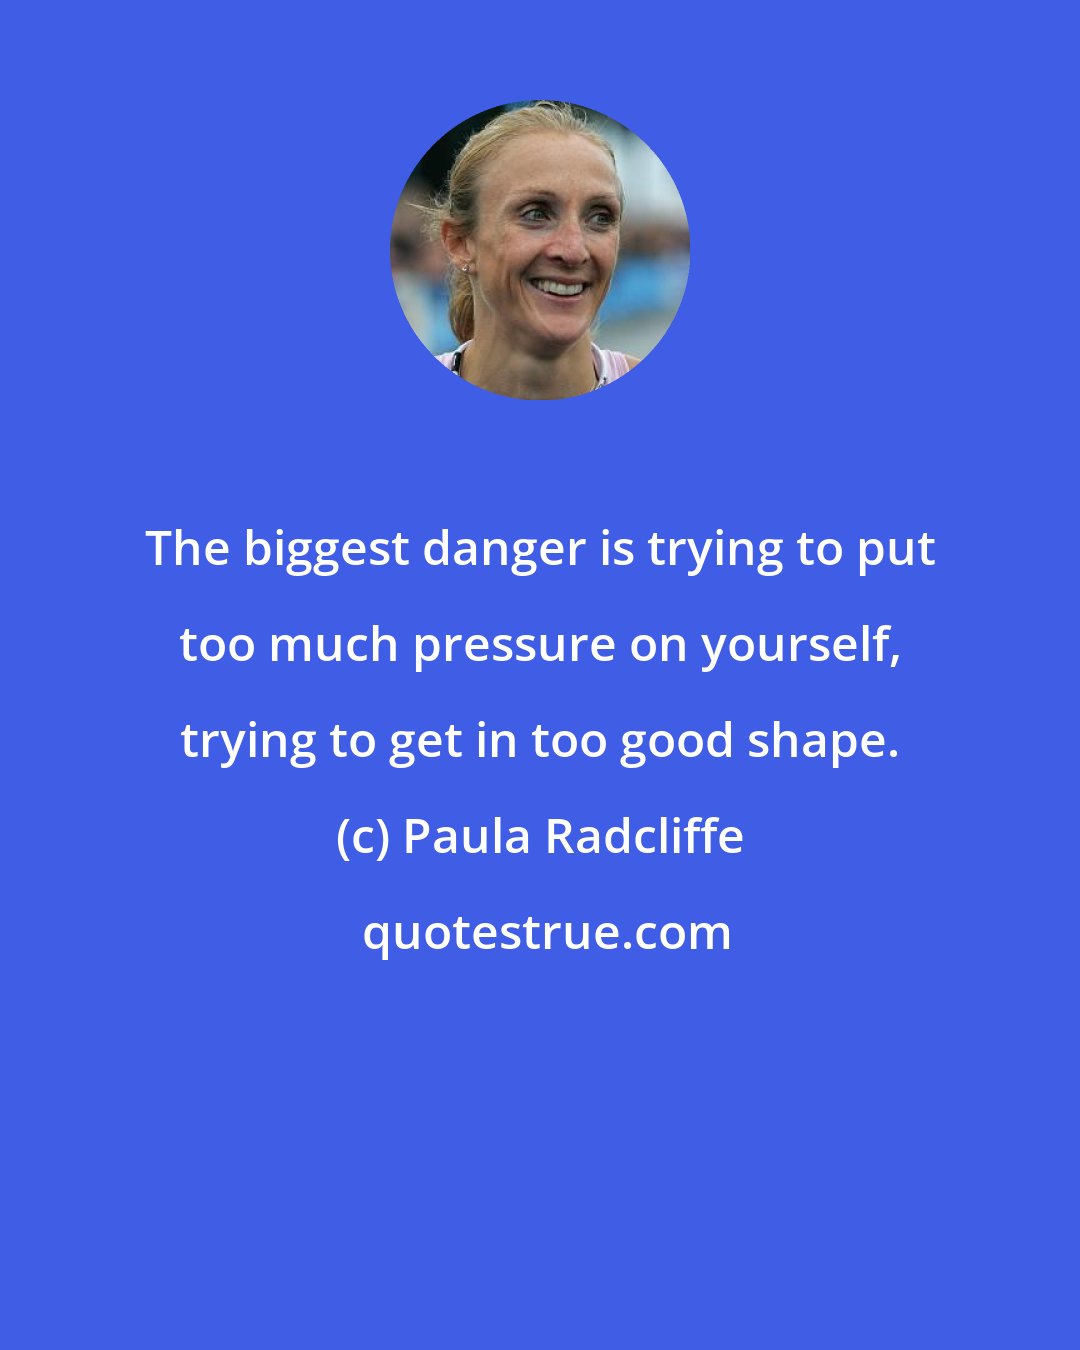 Paula Radcliffe: The biggest danger is trying to put too much pressure on yourself, trying to get in too good shape.